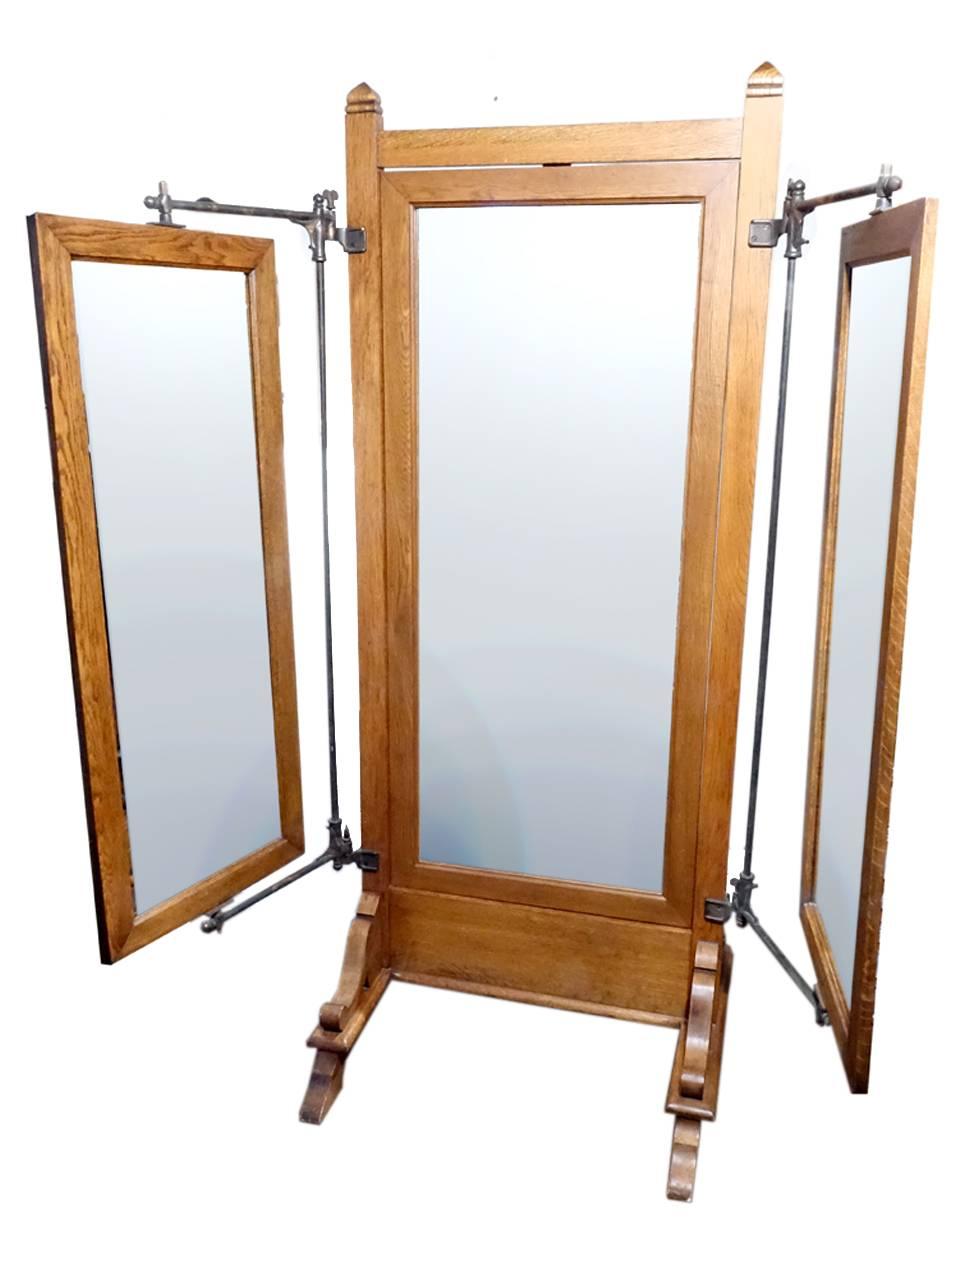 These early commercial mirrors are very hard to come by. I like them best when they have the ornate cast iron swivel outriggers. They look great and function even better. It has a handsome heavy Empire oak wood frame in it's original finish. The